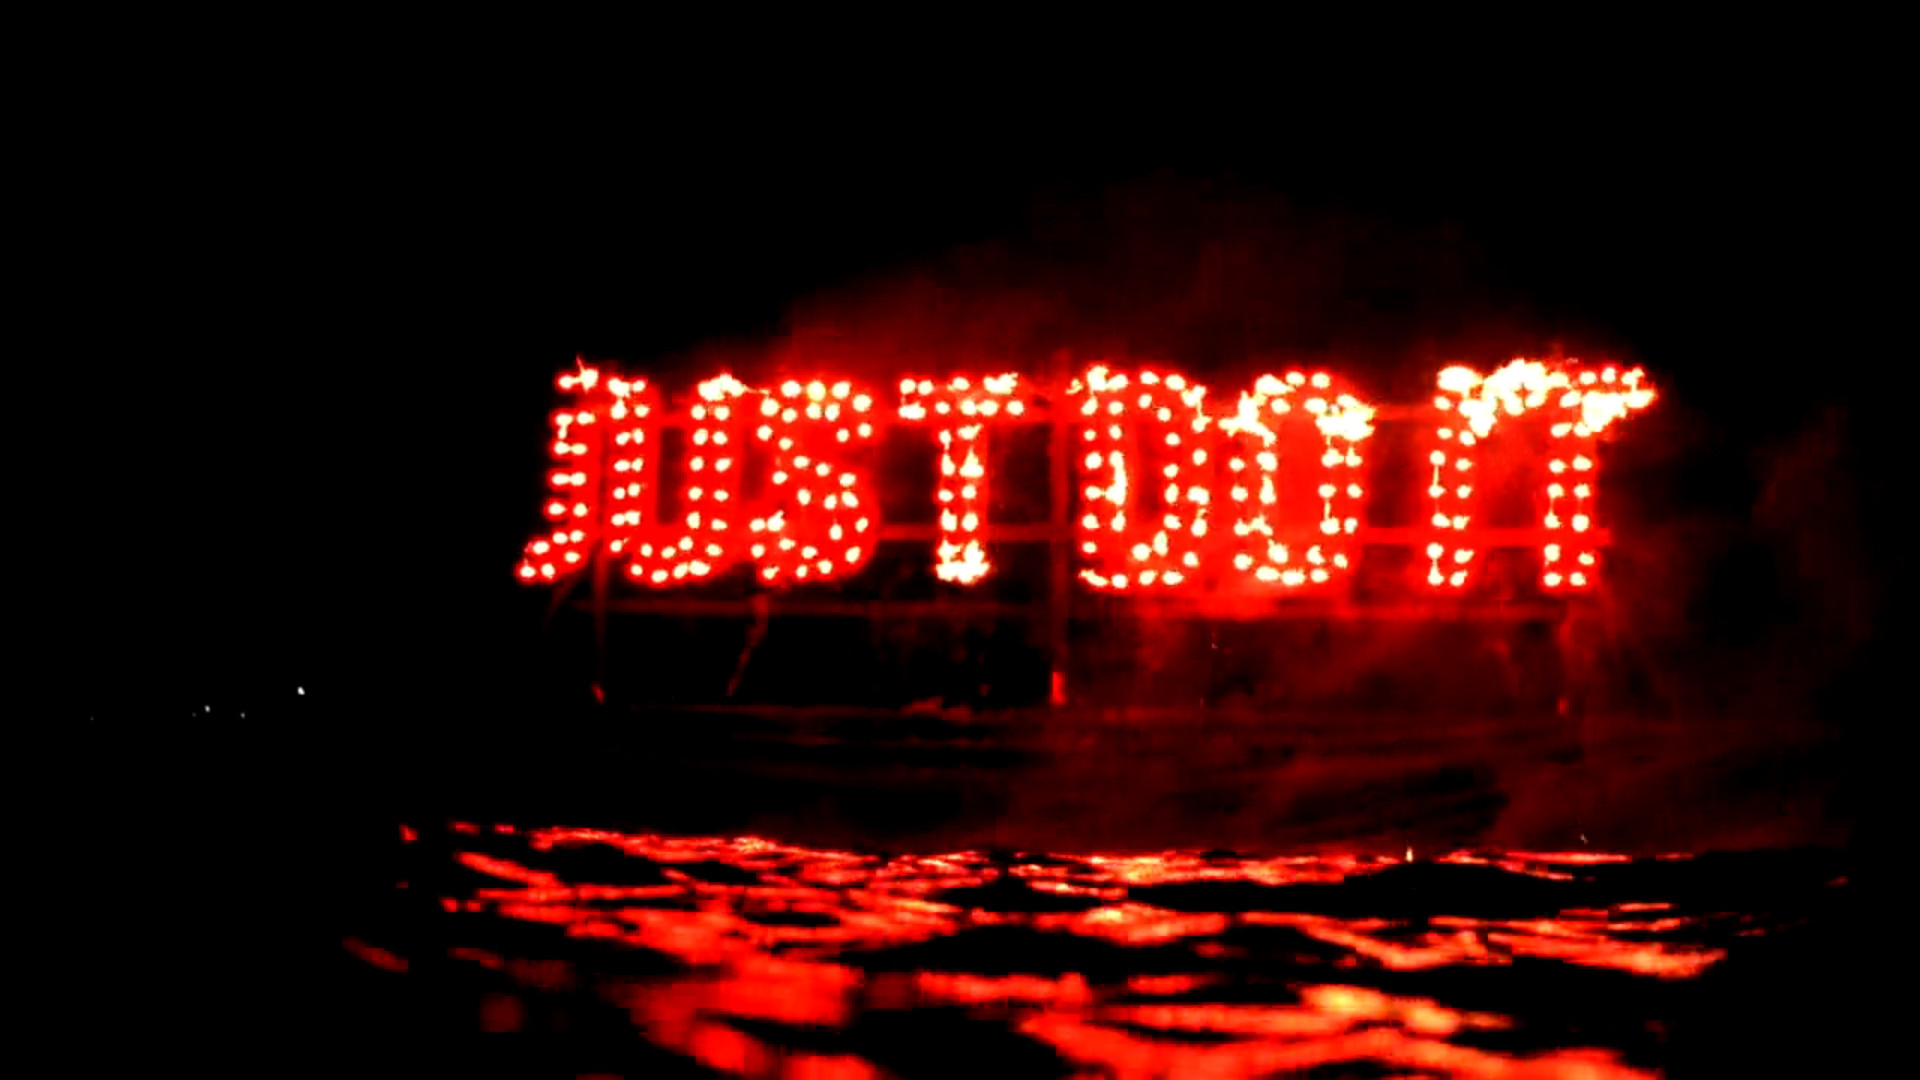 1920x1080 Art Images Just Do It Download.